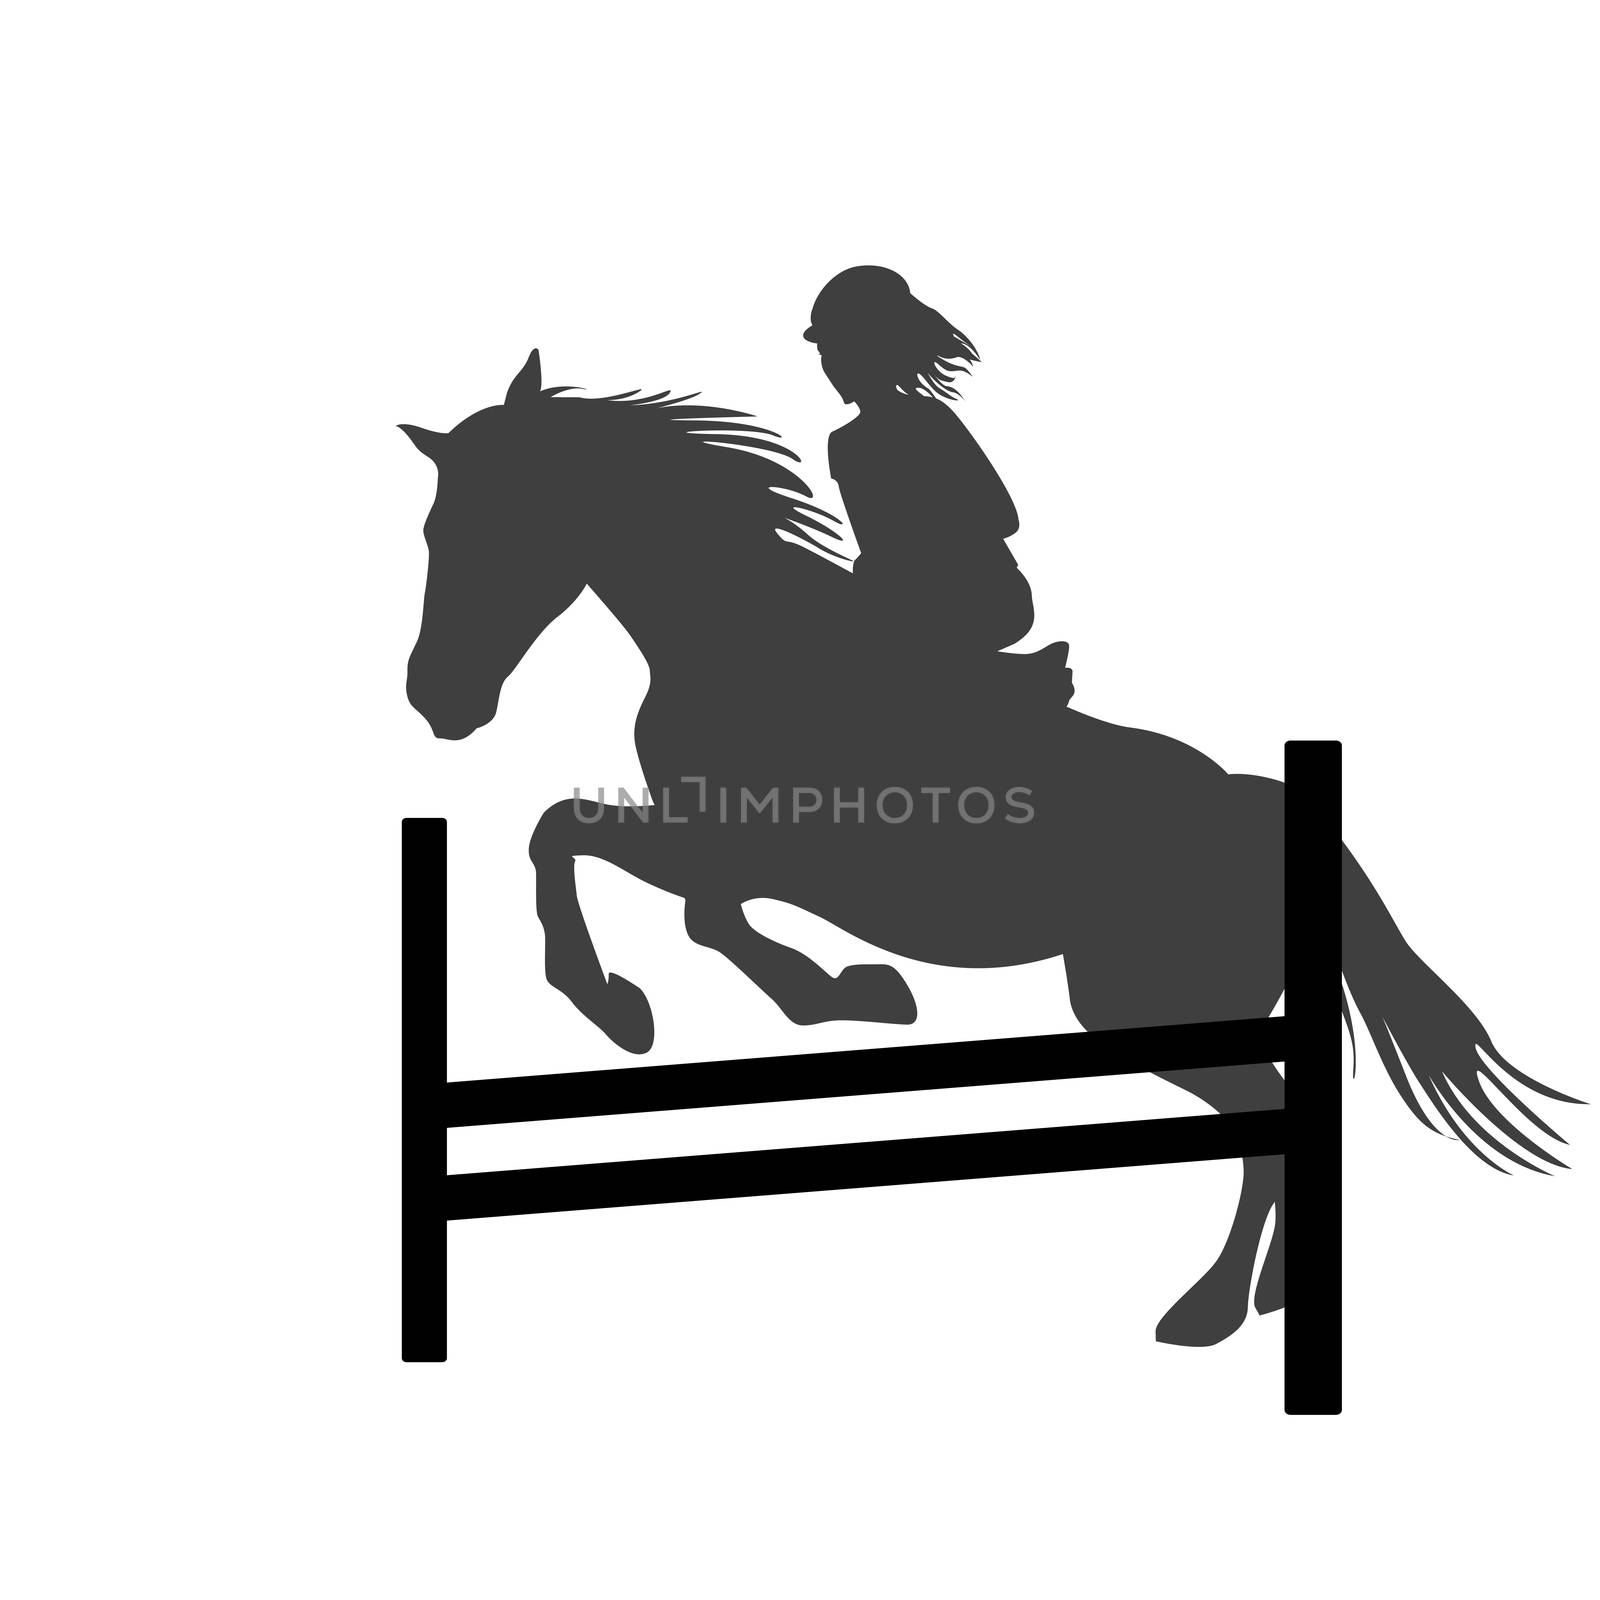 Silhouette of a rider girl on horse jumping over obstacle by hibrida13